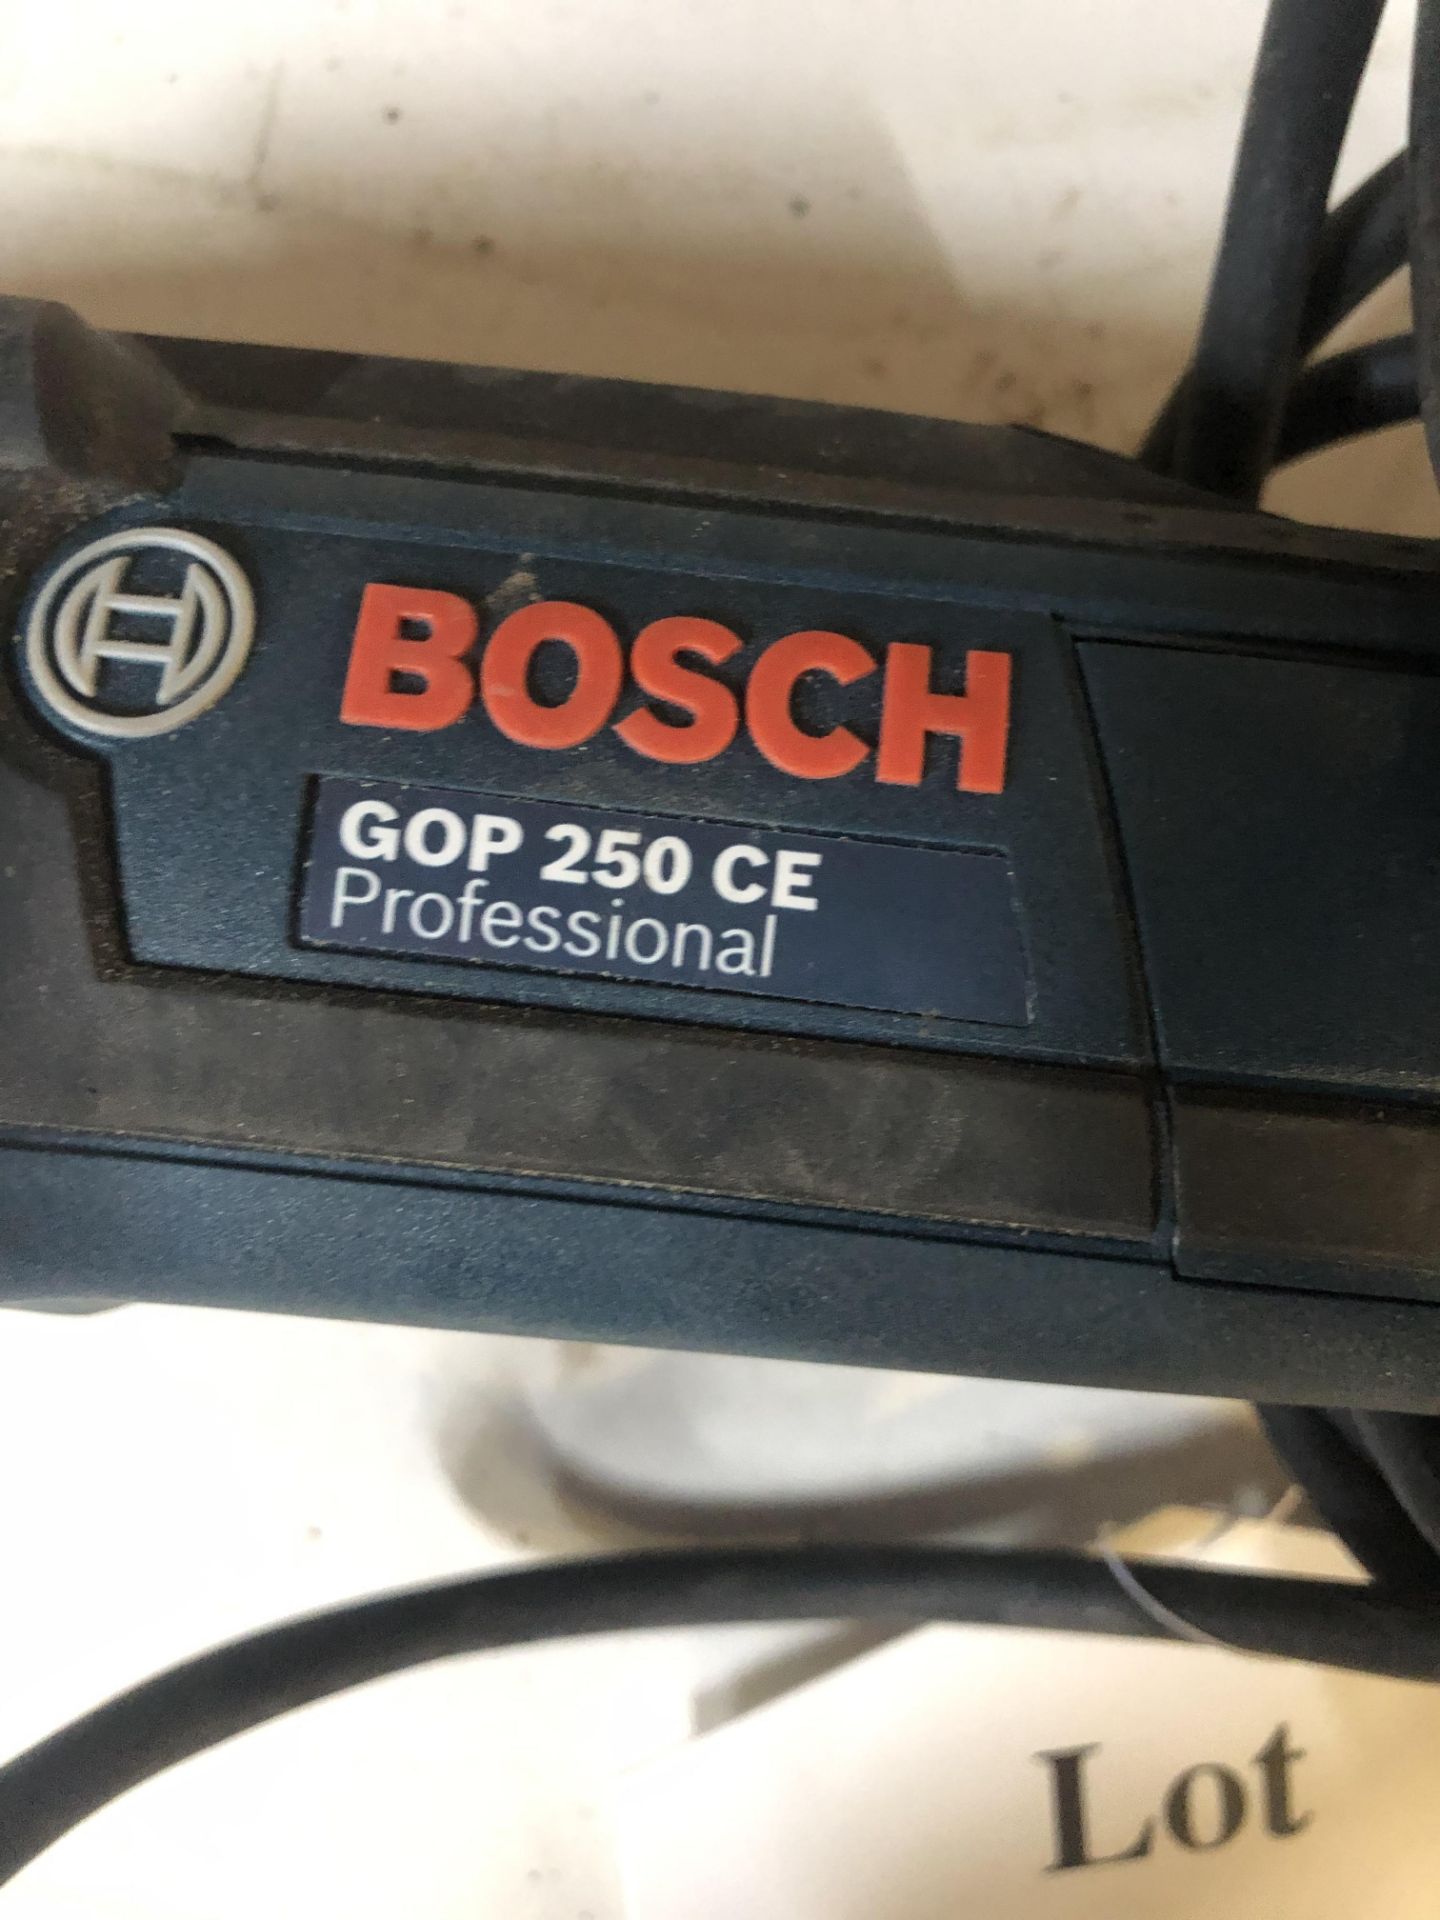 Bosch GOP 250 CE Corded Multi-Functional Tool - Image 2 of 2